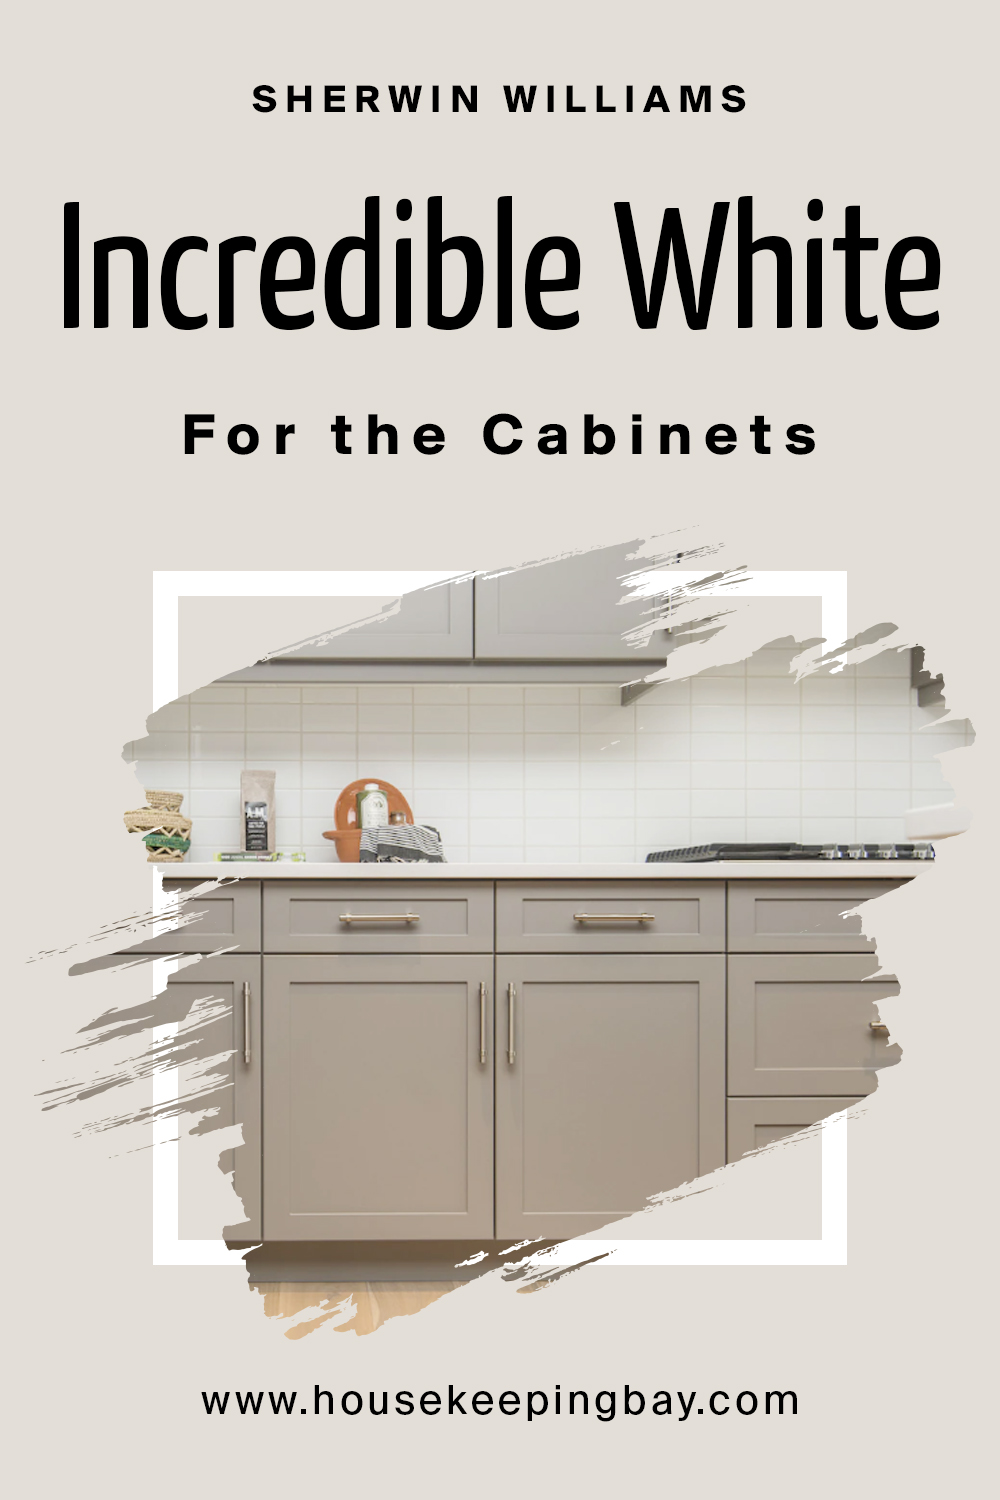 Sherwin Williams. Incredible White For the Cabinets